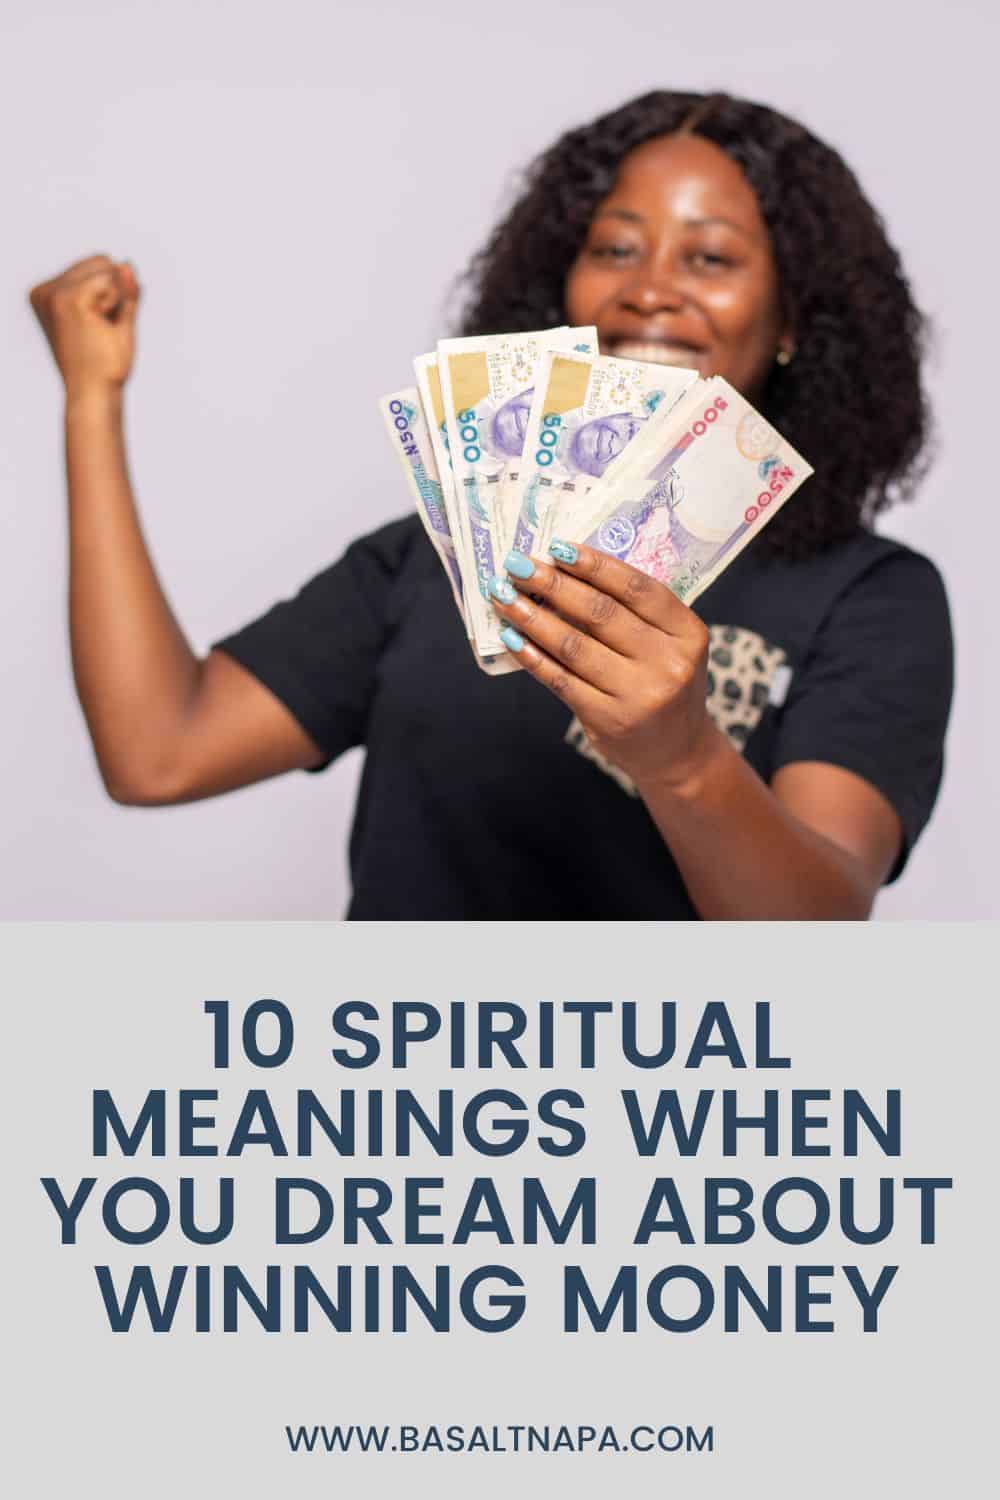 Spiritual Meanings When You Dream About Winning Money